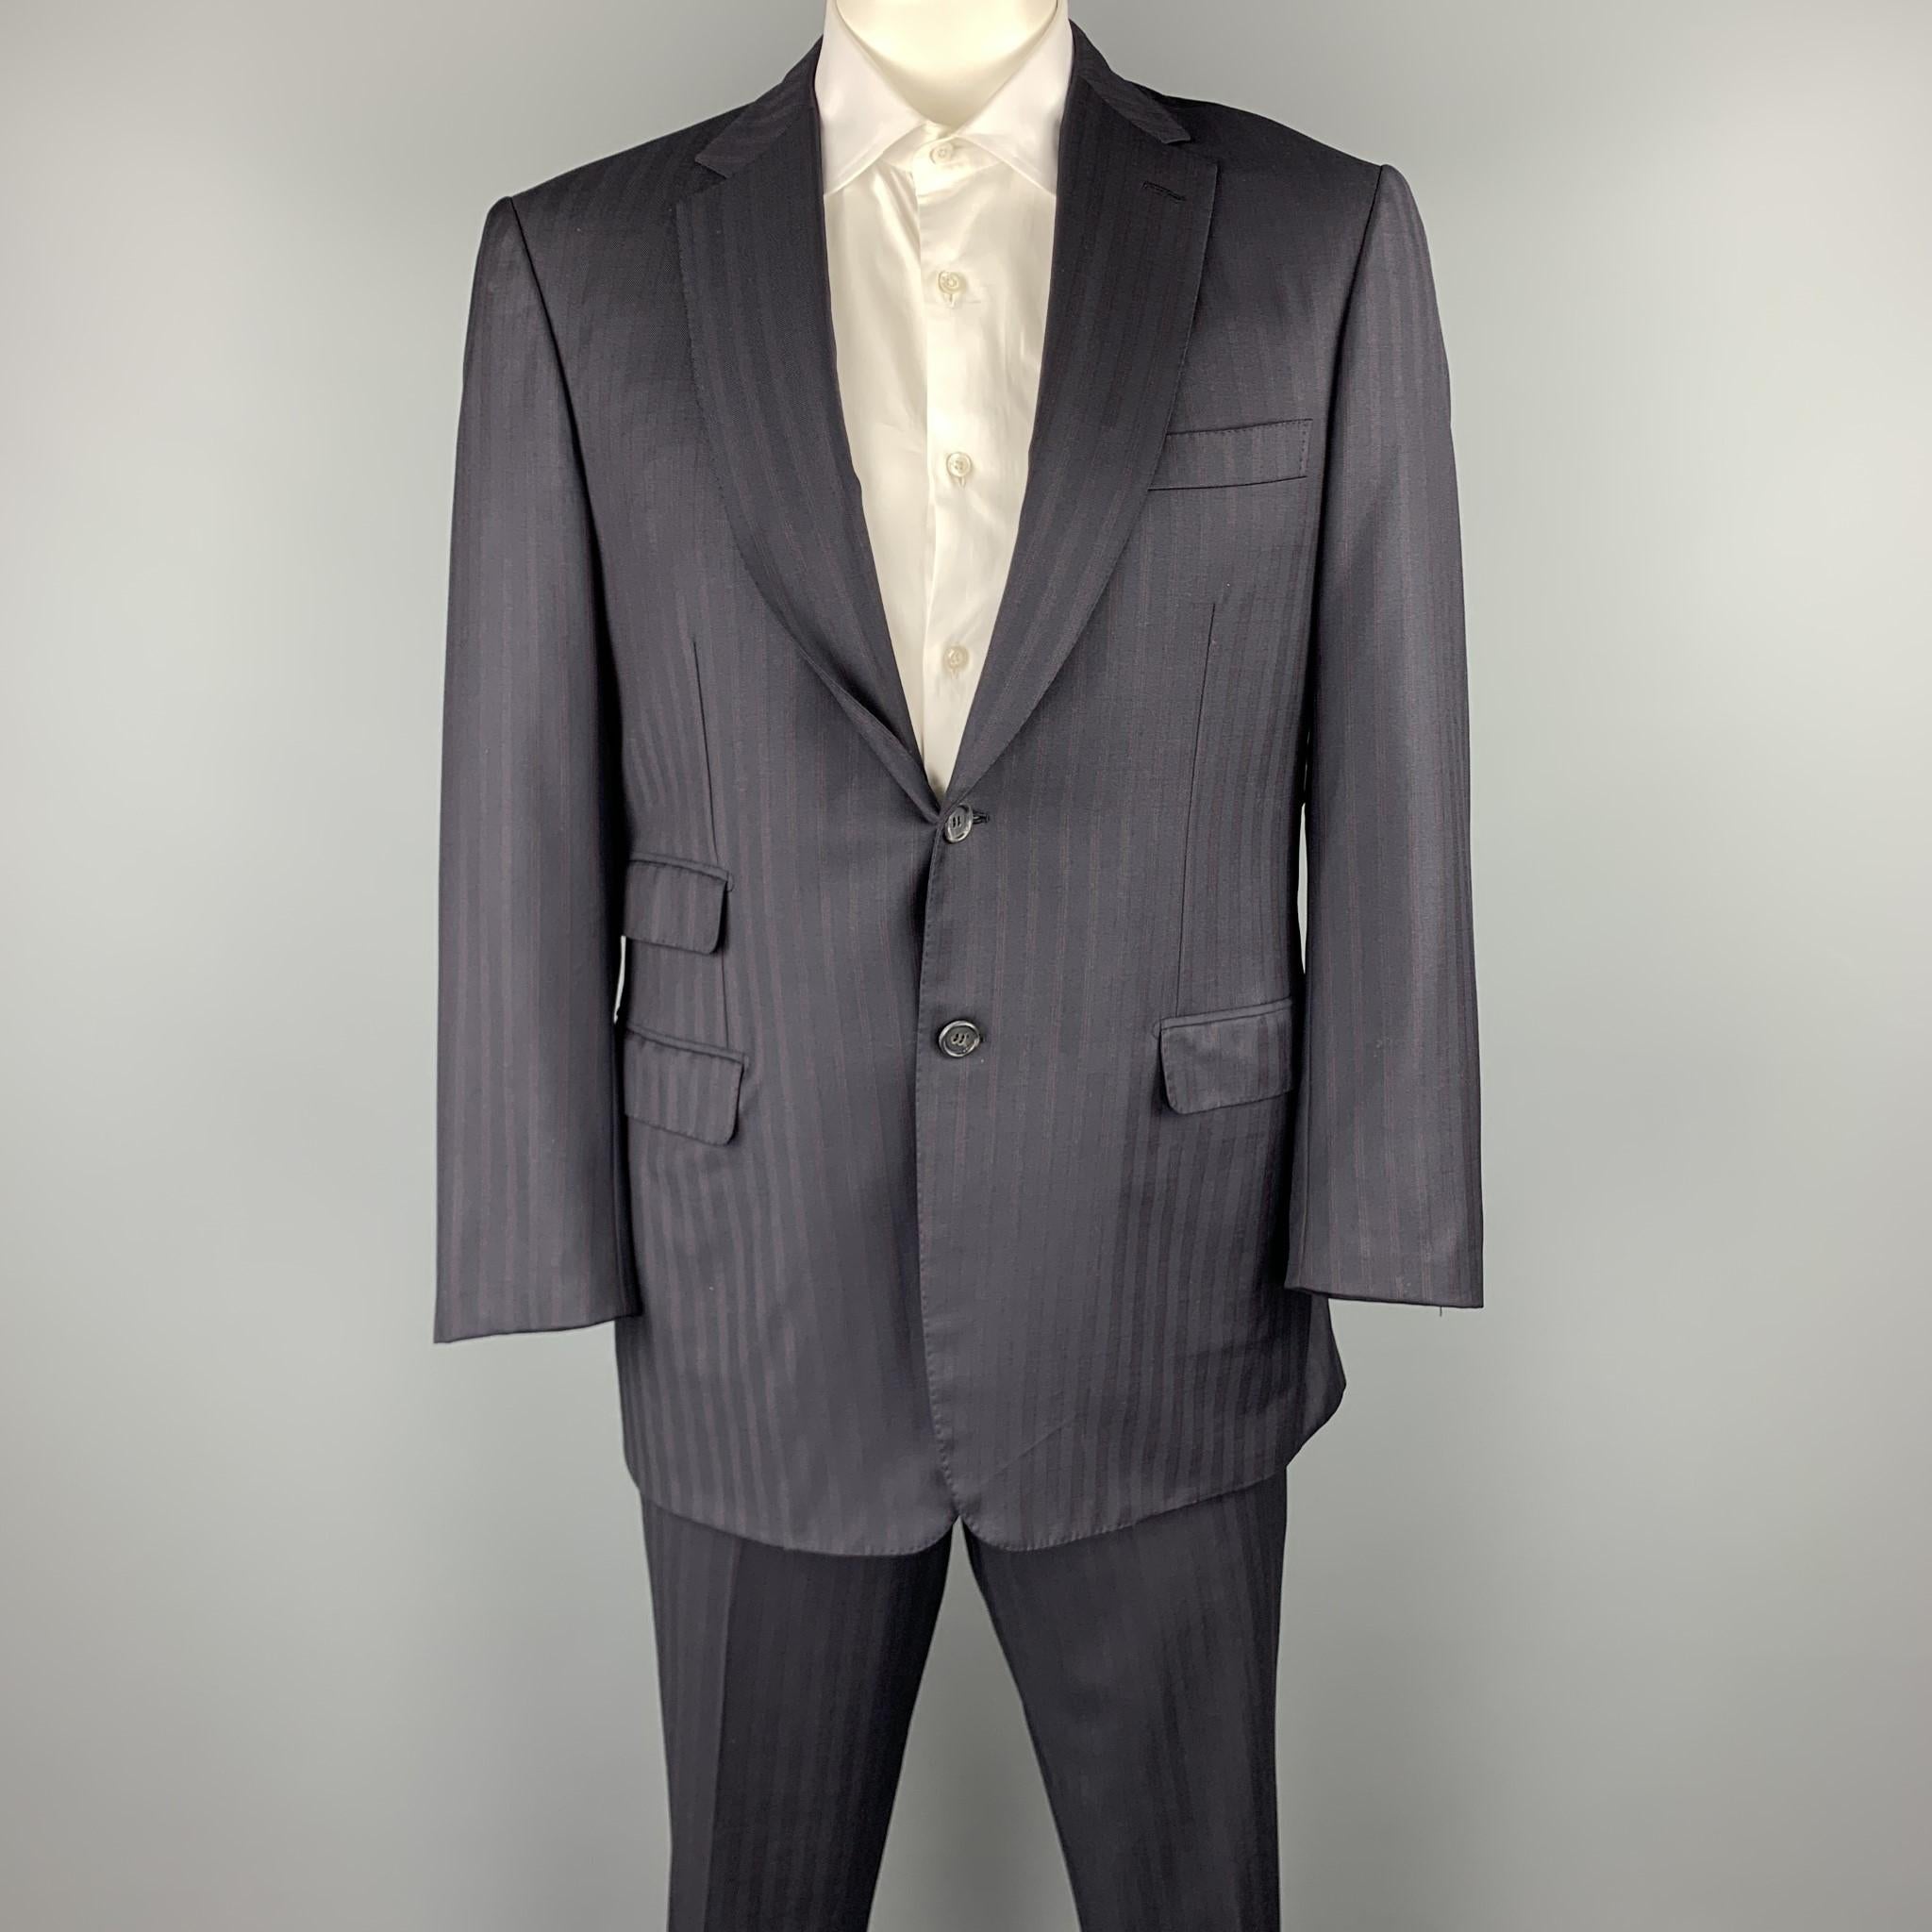 BRIONI suit comes in a navy stripe wool and includes a single breasted, two button sport coat with a notch lapel and matching flat front trousers. Made in Italy.

Excellent Pre-Owned Condition.
Marked: 42 R

Measurements:

-Jacket
Shoulder: 18